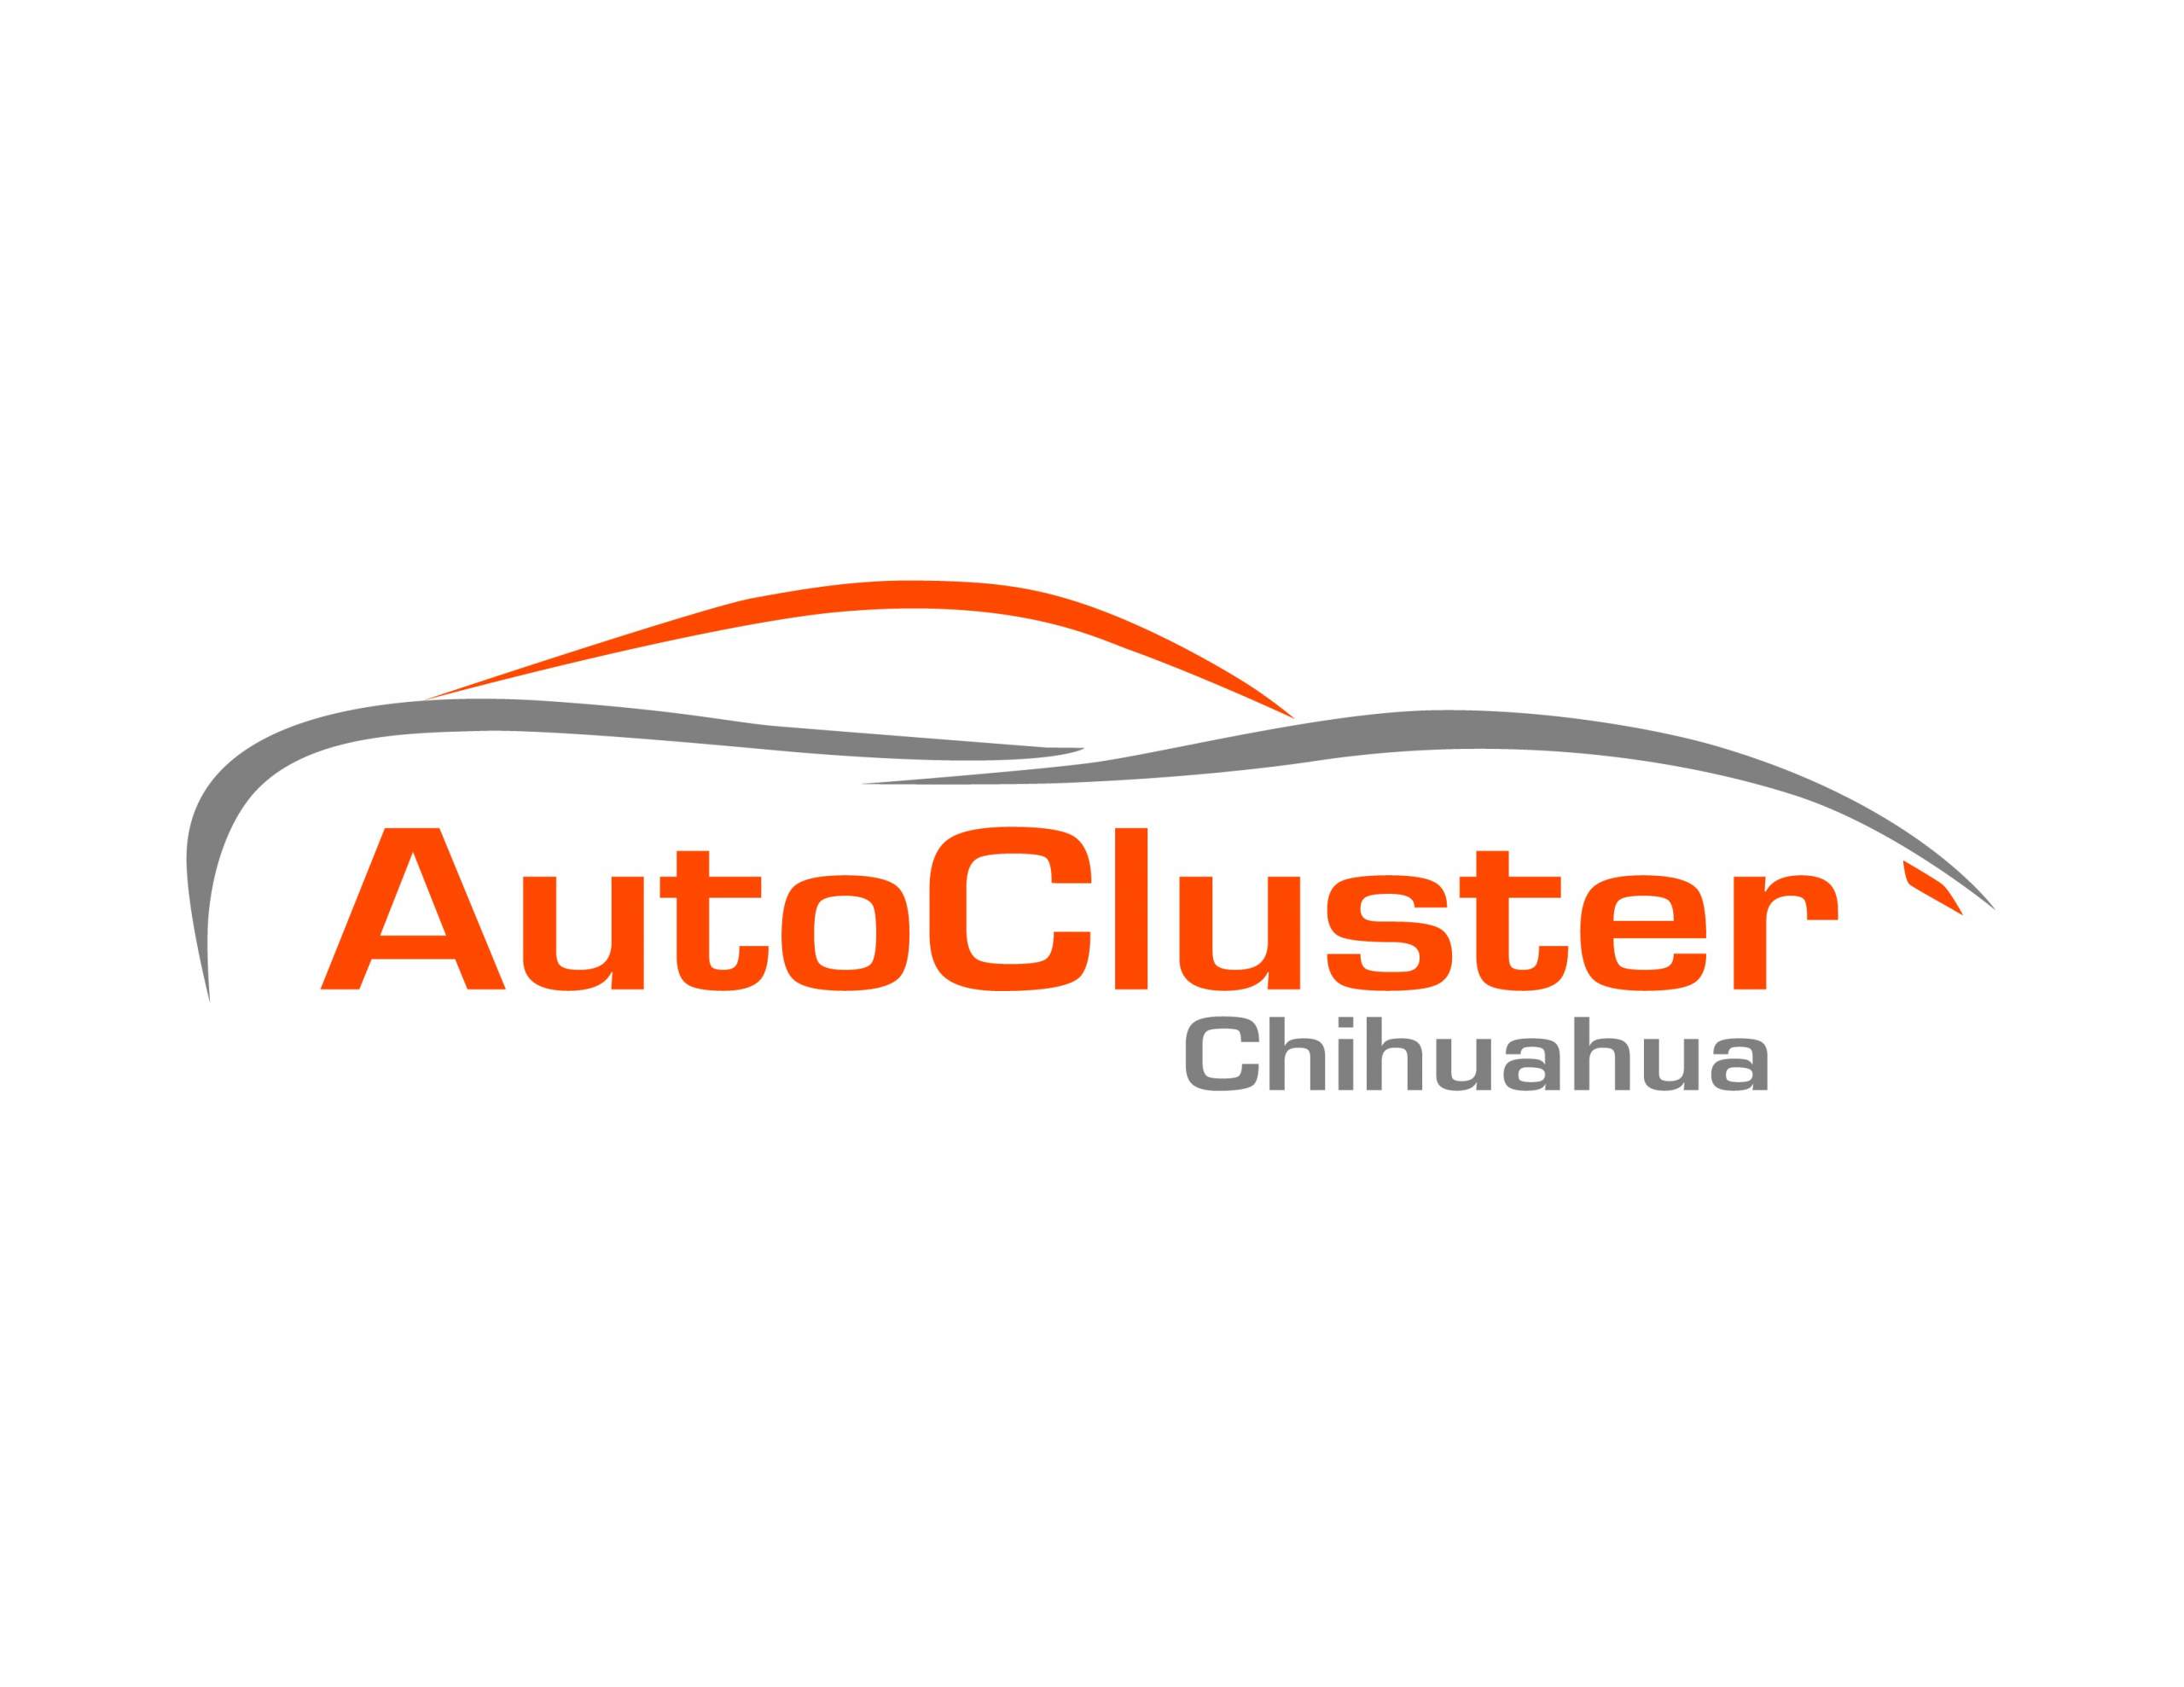 Chihuahua AutoCluster promotes business in Arizona